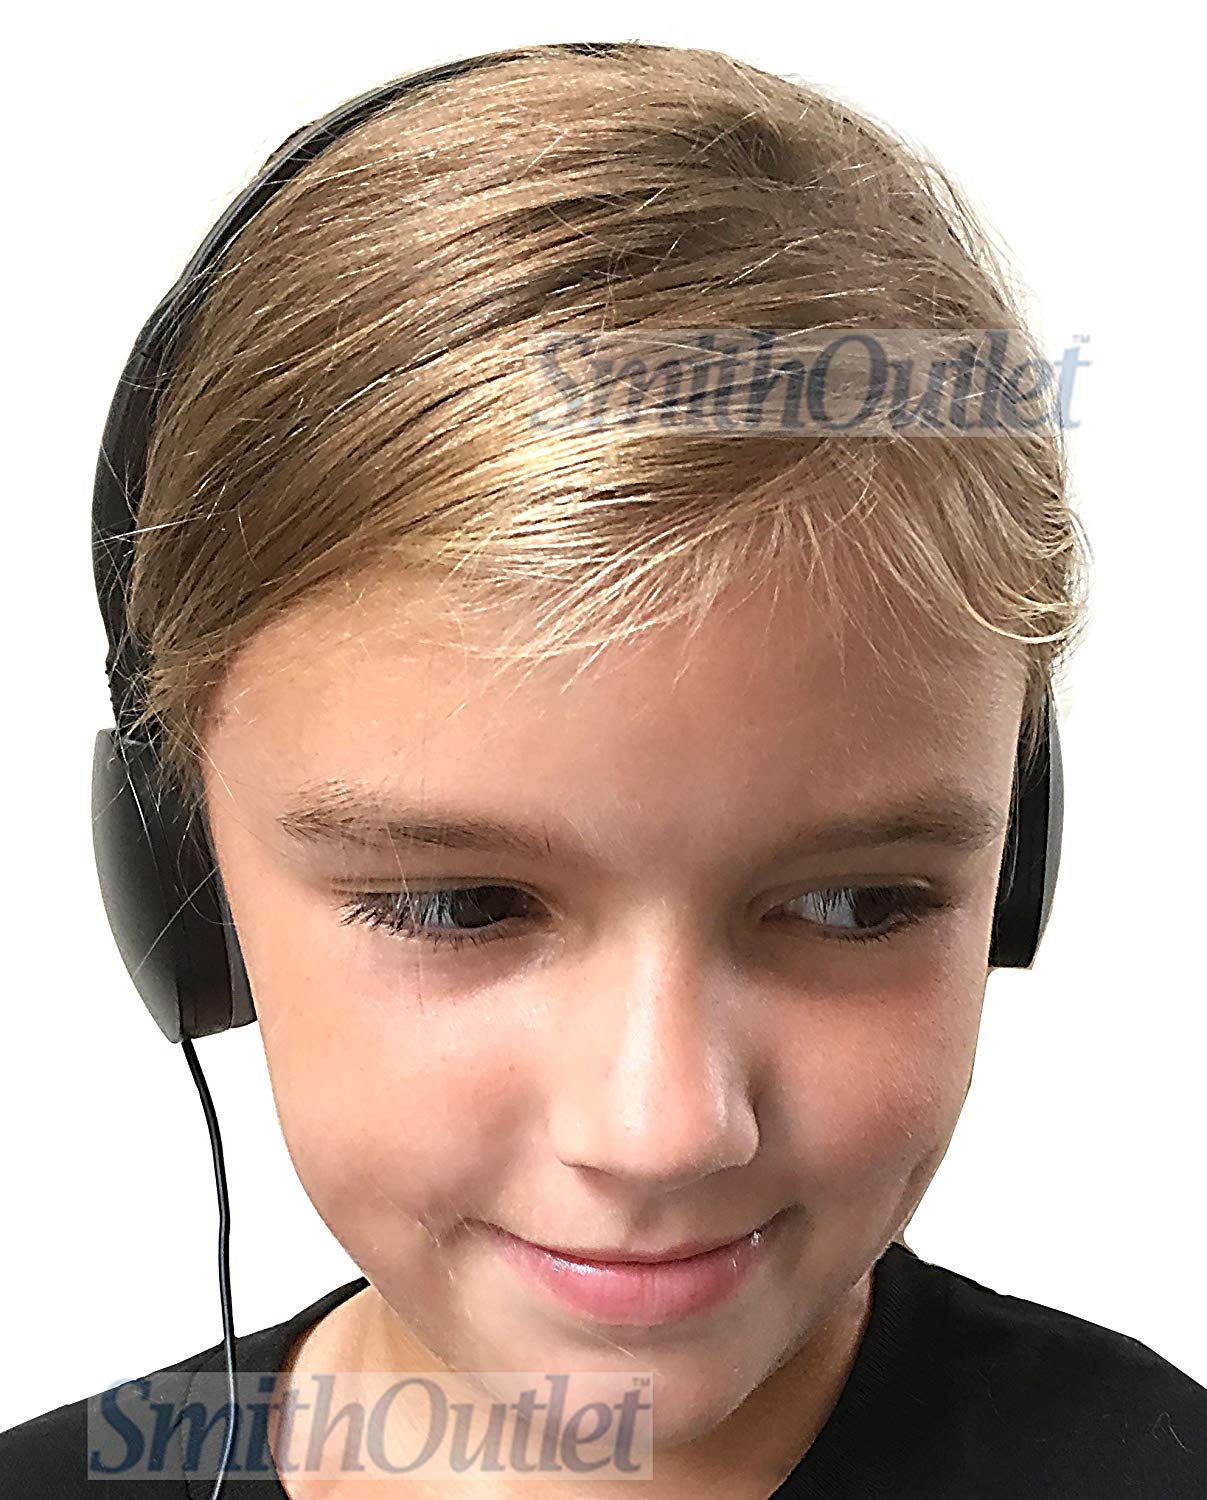 SmithOutlet Rubber Earpad Headphones in Use in a Classroom Environment